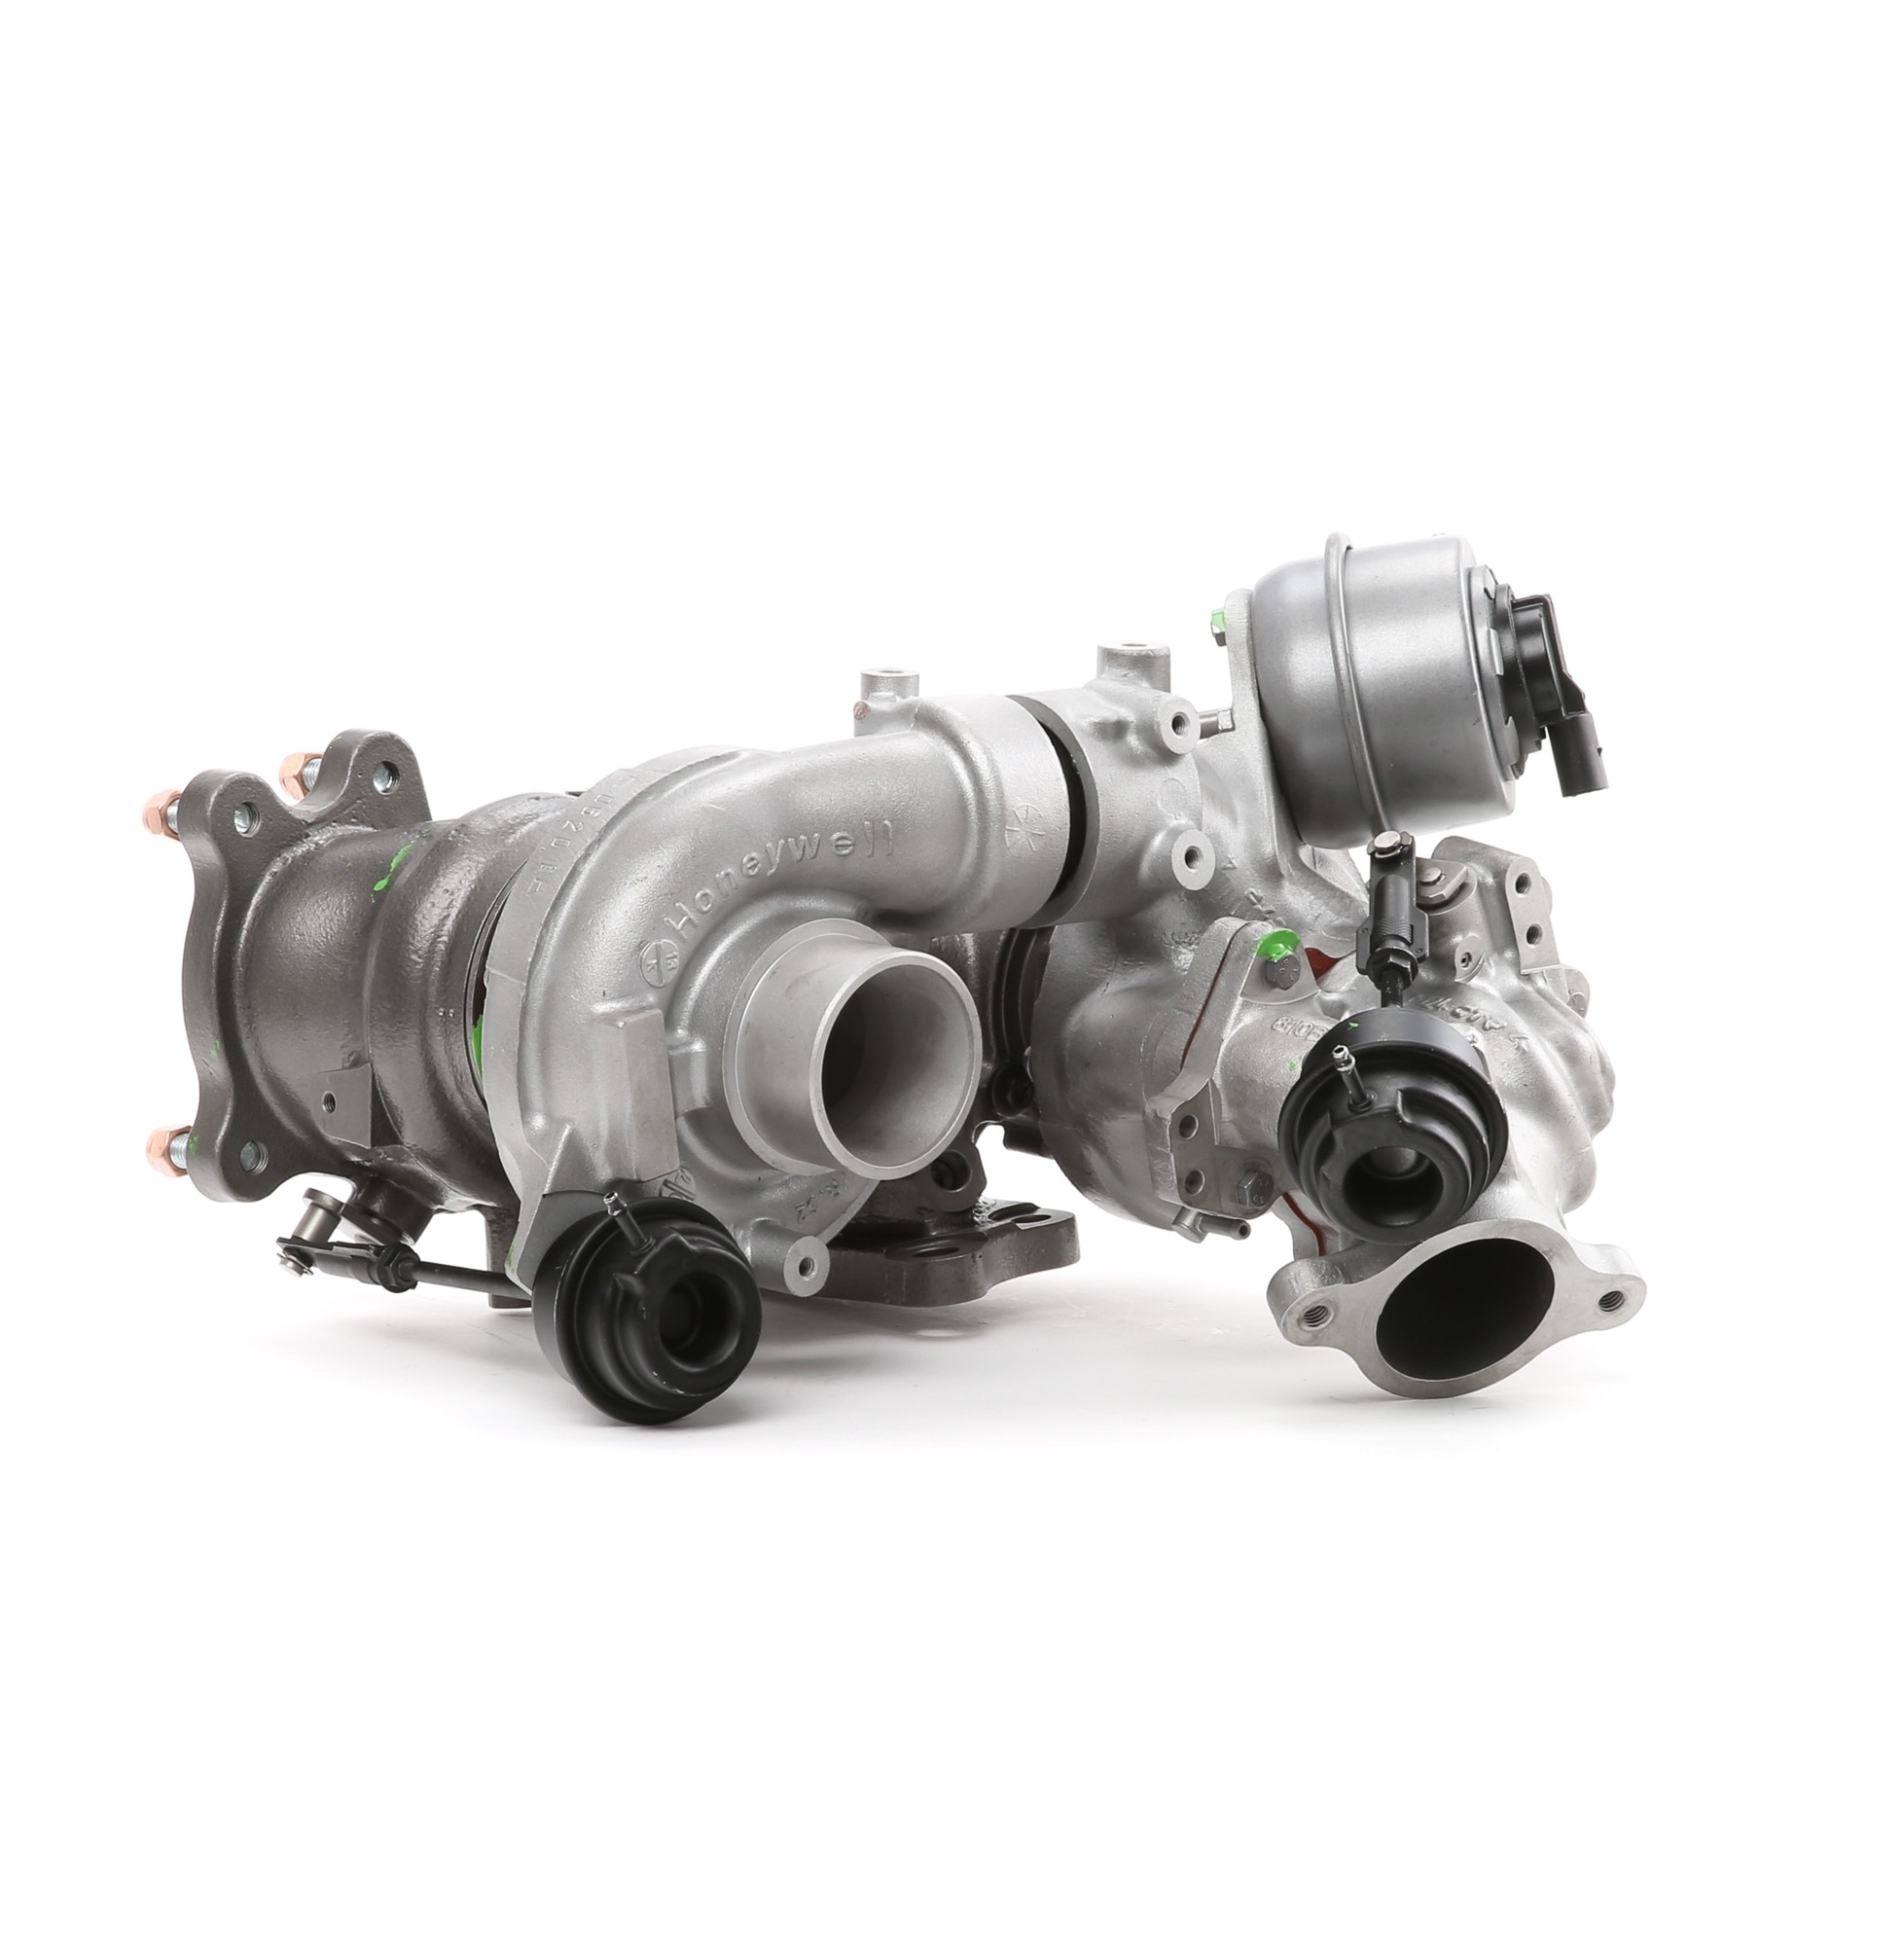 RIDEX REMAN 2234C10108R Turbocharger Exhaust Turbocharger, with three actuators, regulated two-stage charging, without gaskets/seals